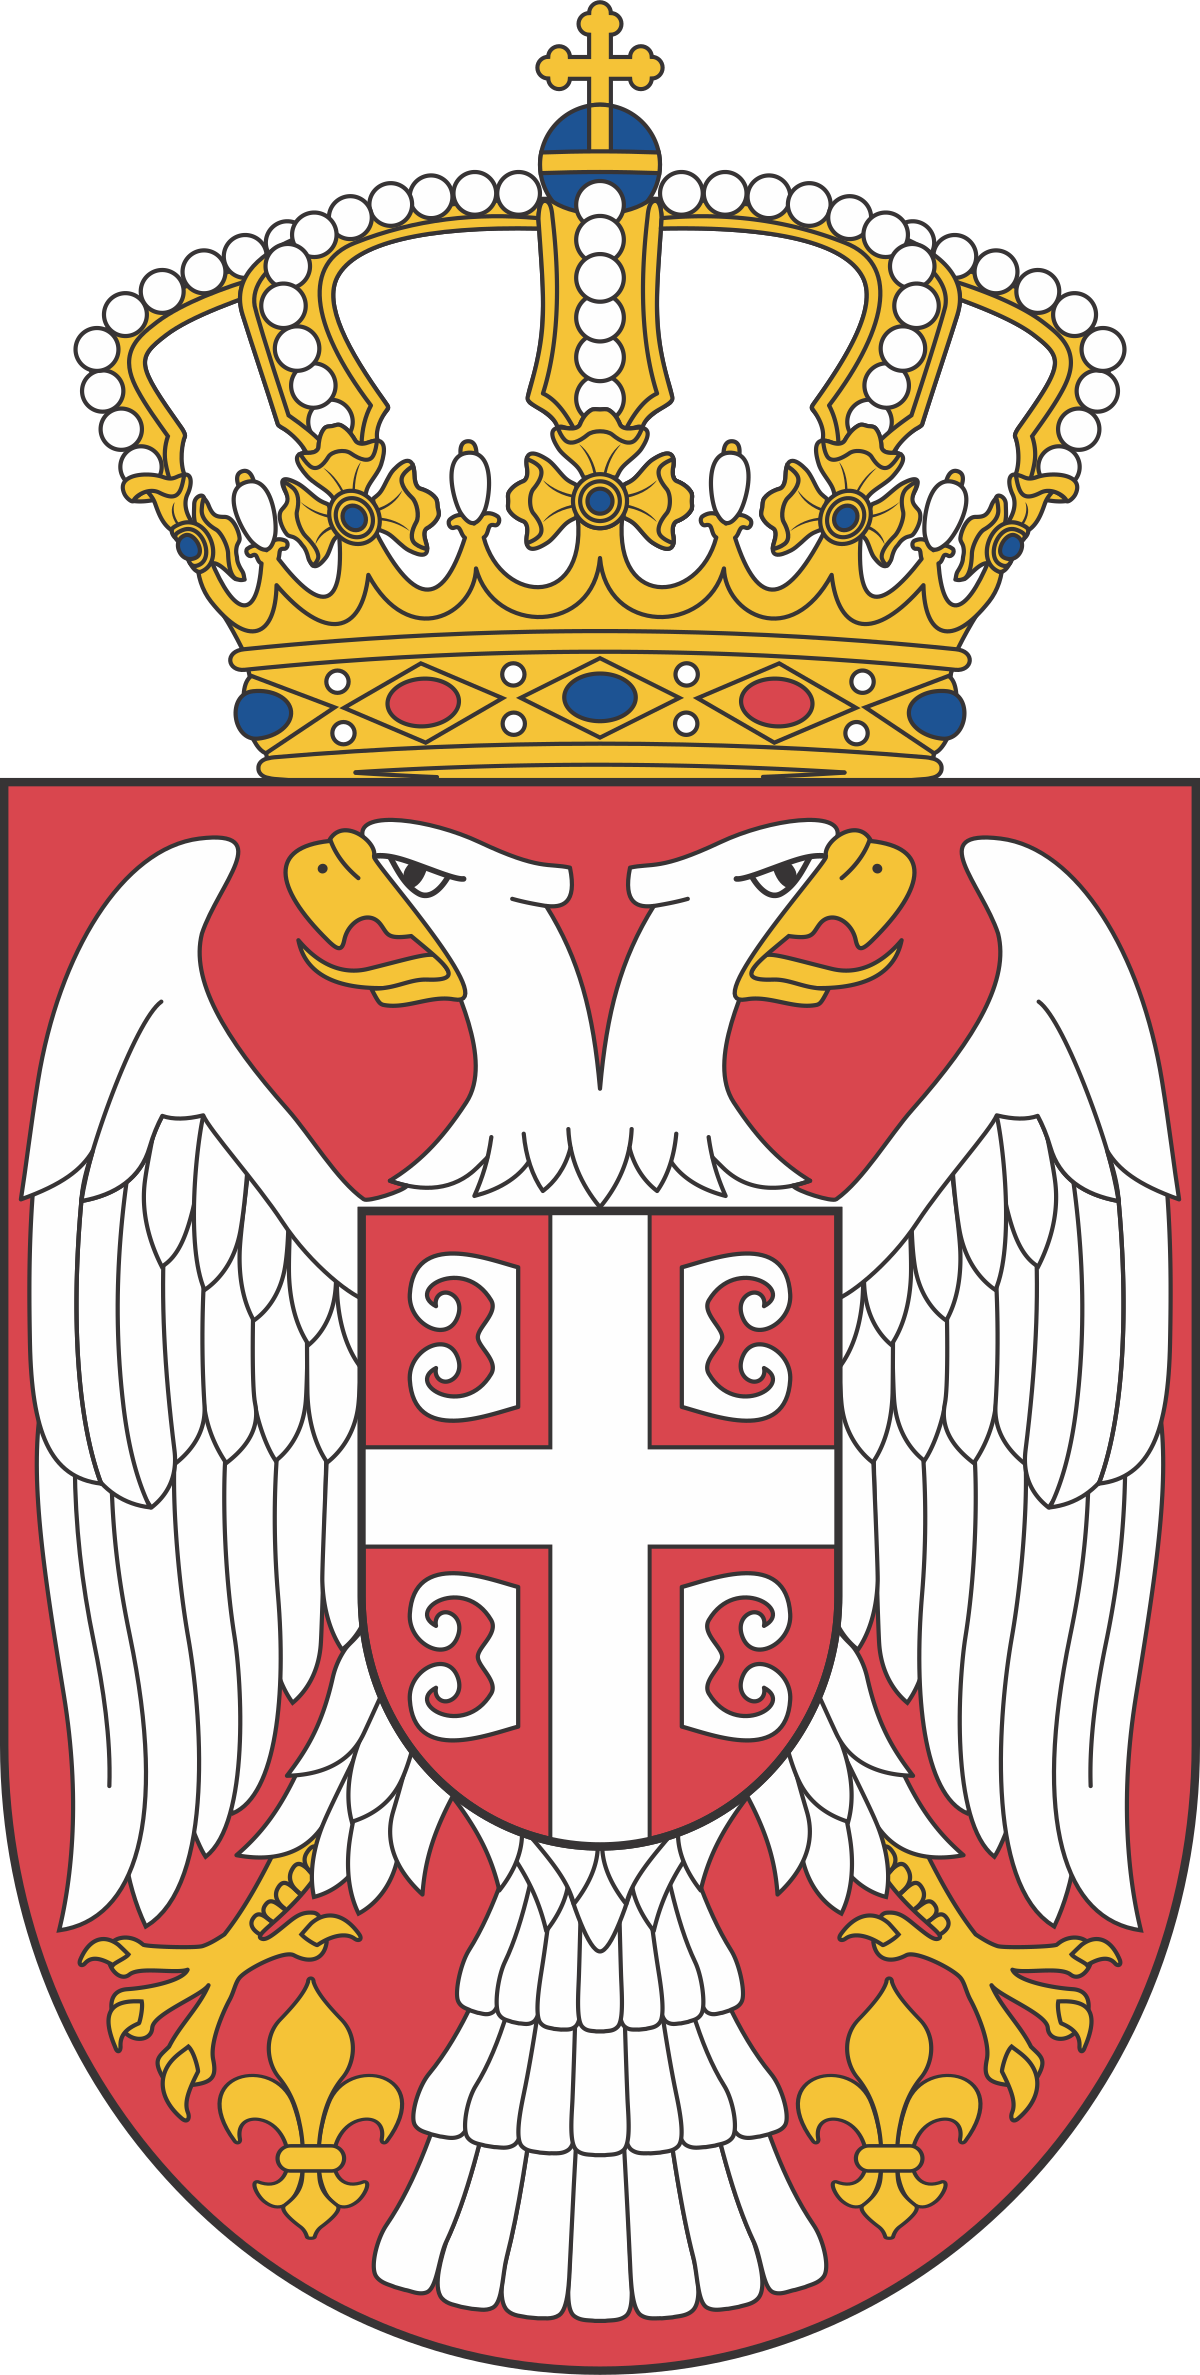 Coat of Arms of Serbia